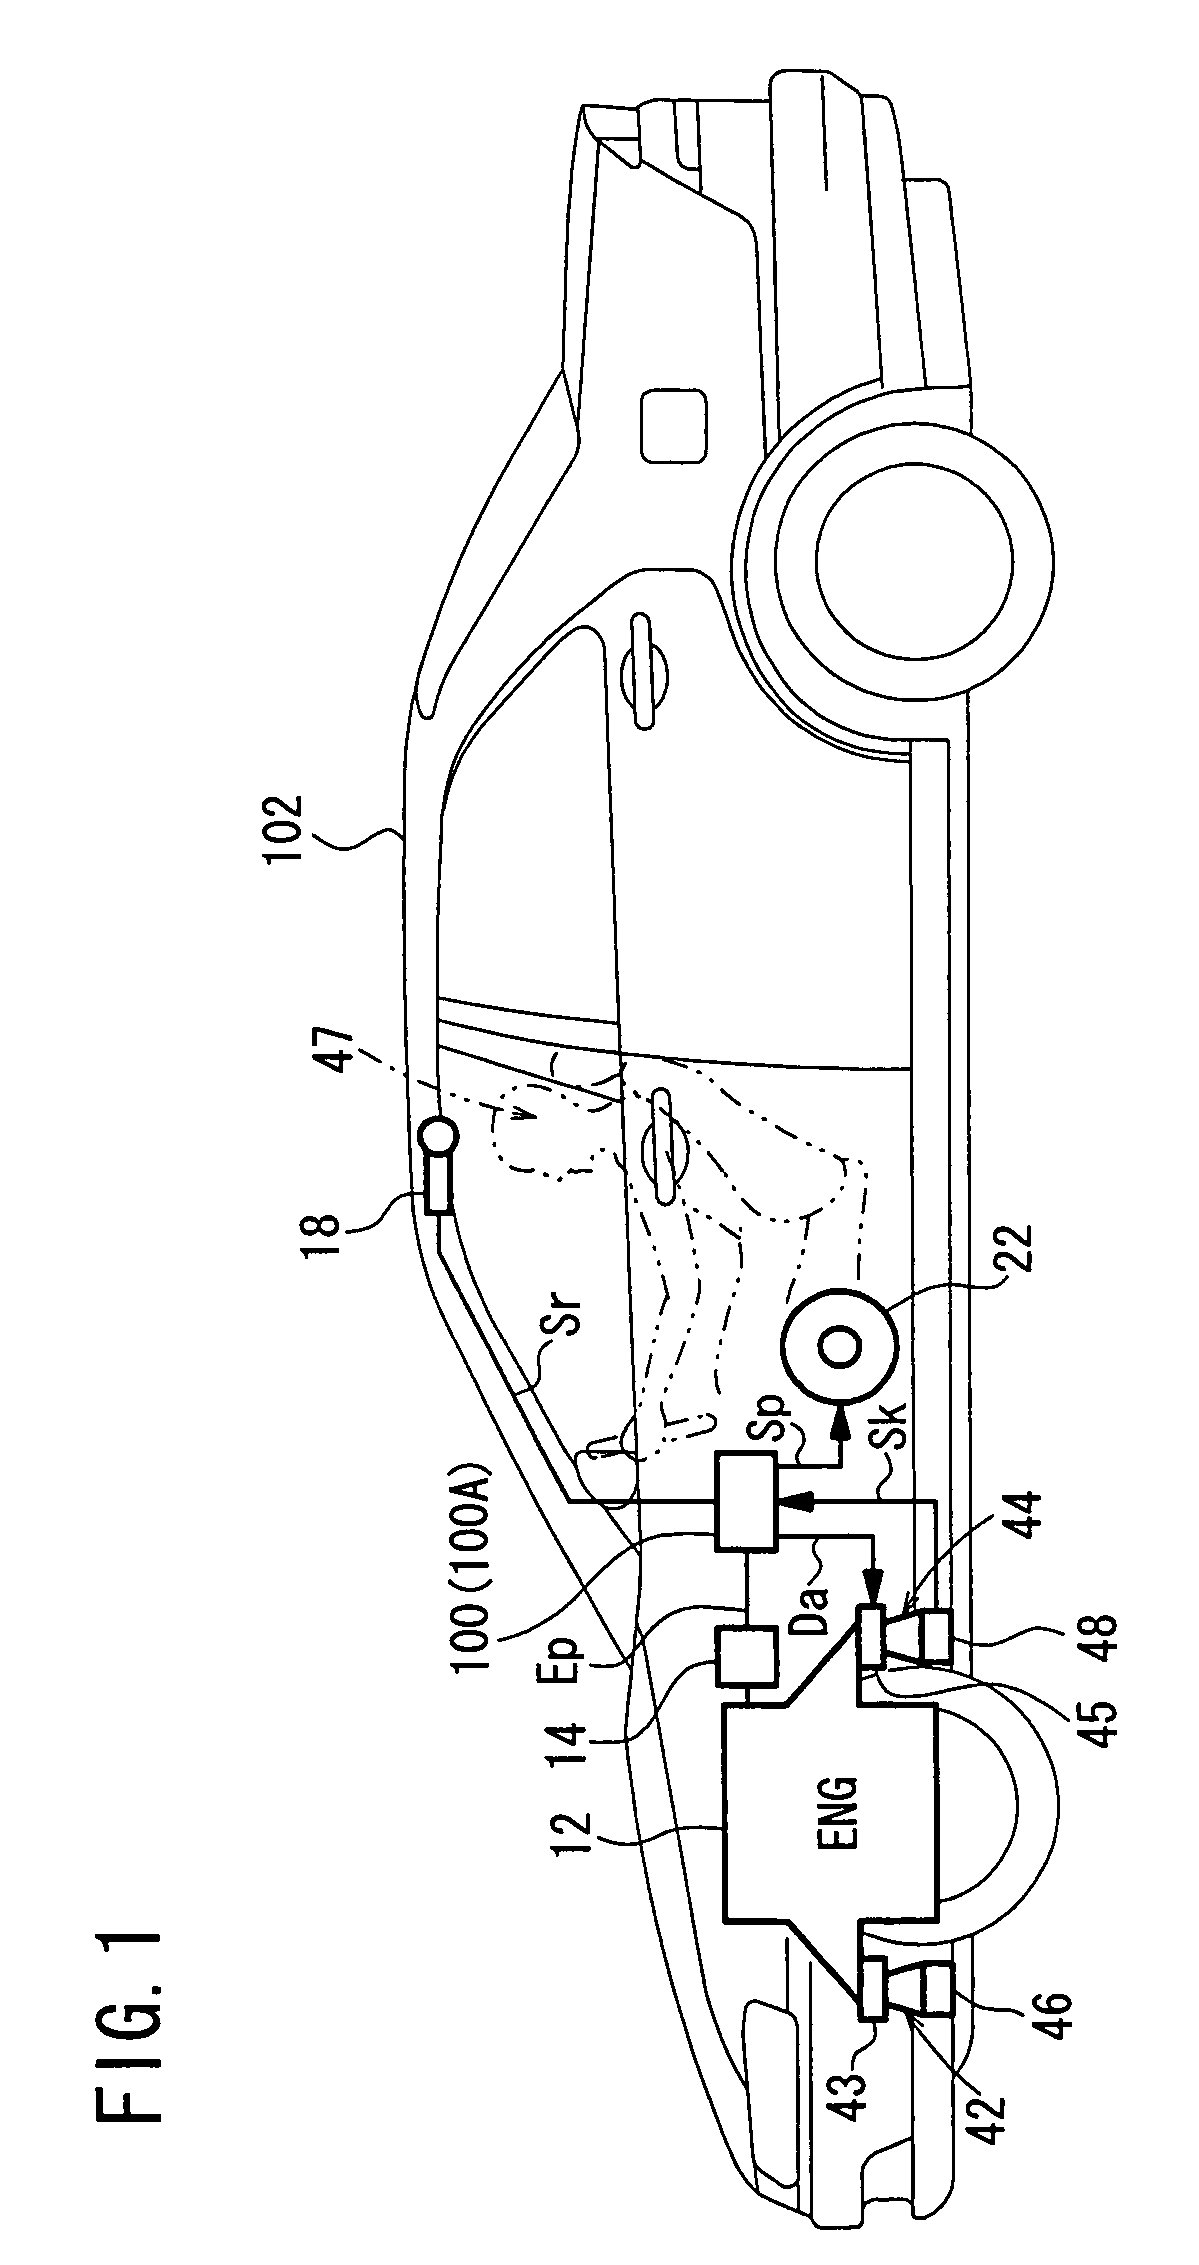 Vehicular active noise/vibration/sound control system, and vehicle incorporating such system